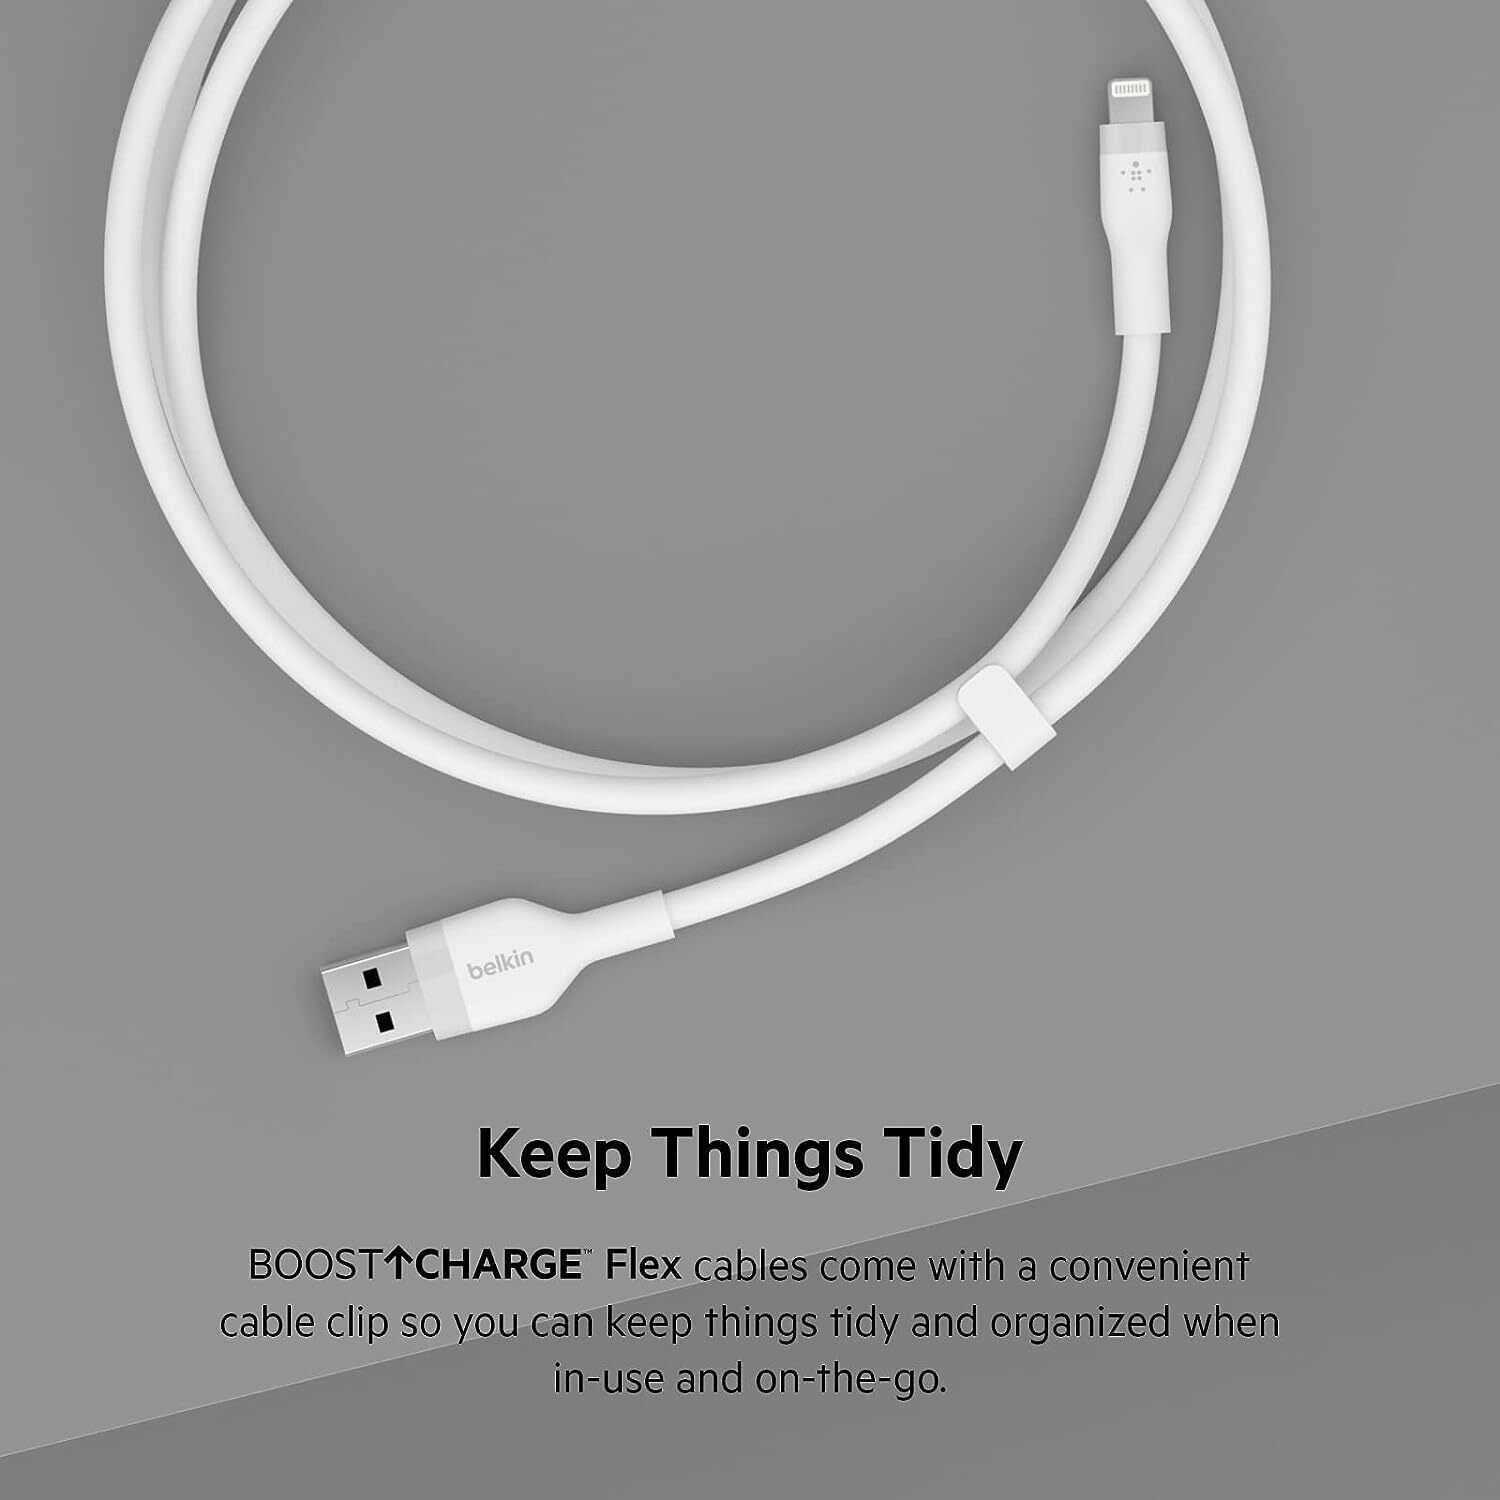 Belkin Apple Certified Lightning to USB Charge and Sync Flexible Silicone Cable for iPhone, iPad, Air Pods, 3.3 feet (1 meters) – White